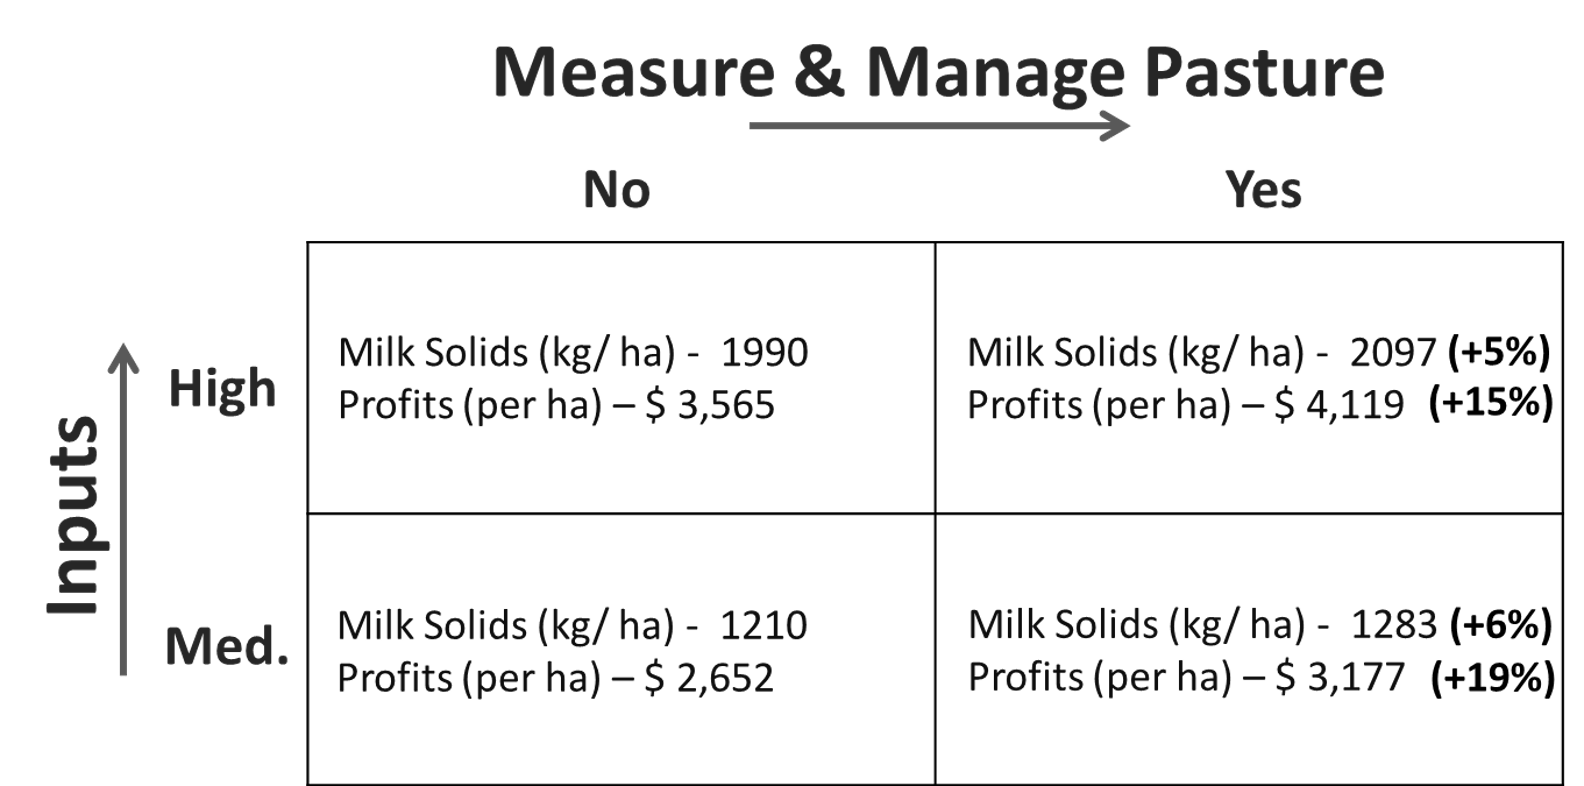 Measuring and utilising pasture measurements for grazing decisions can yield significantly more farm profit